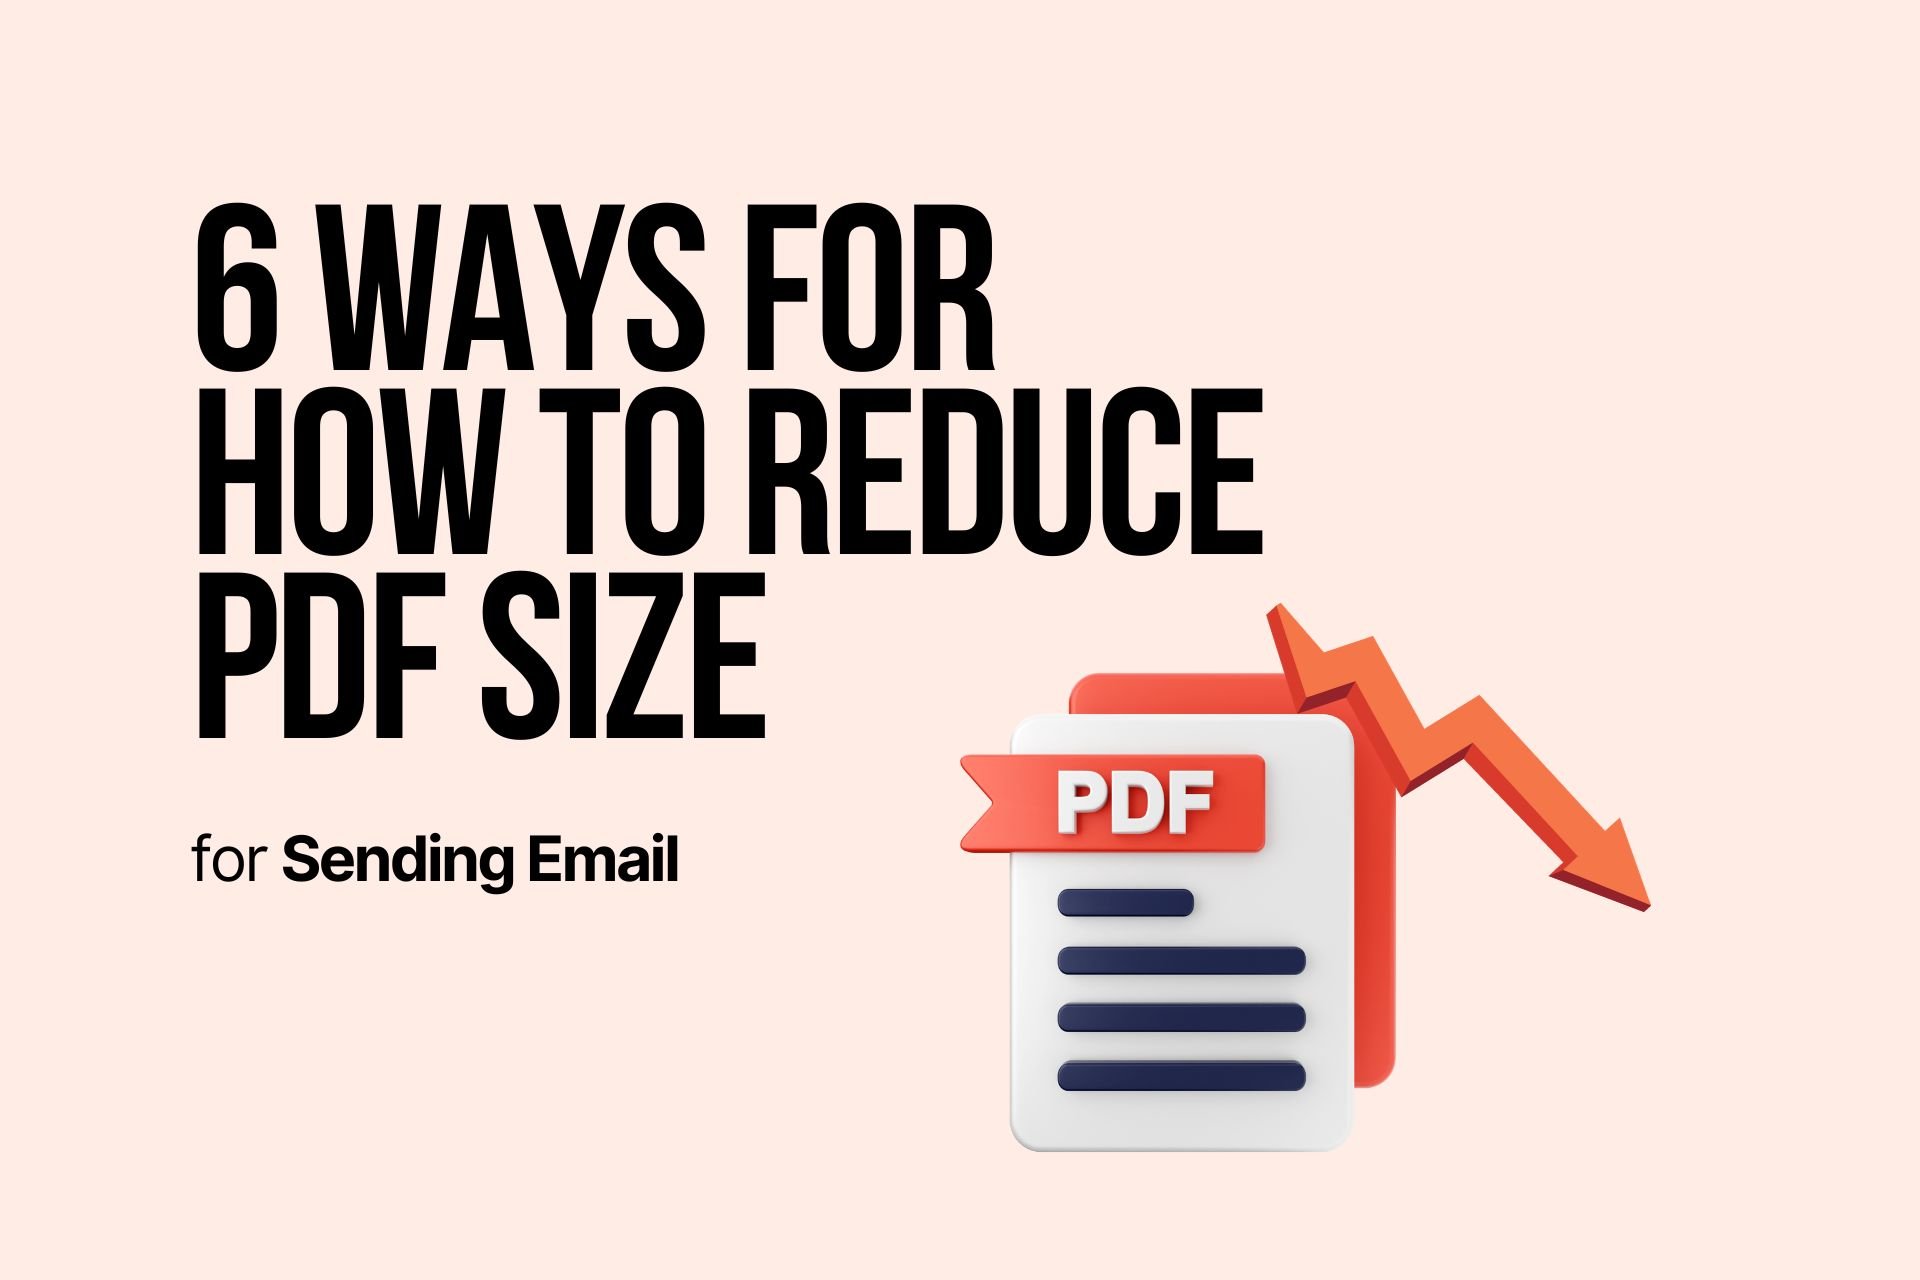 6 Ways for How to Reduce PDF Size for Sending Email